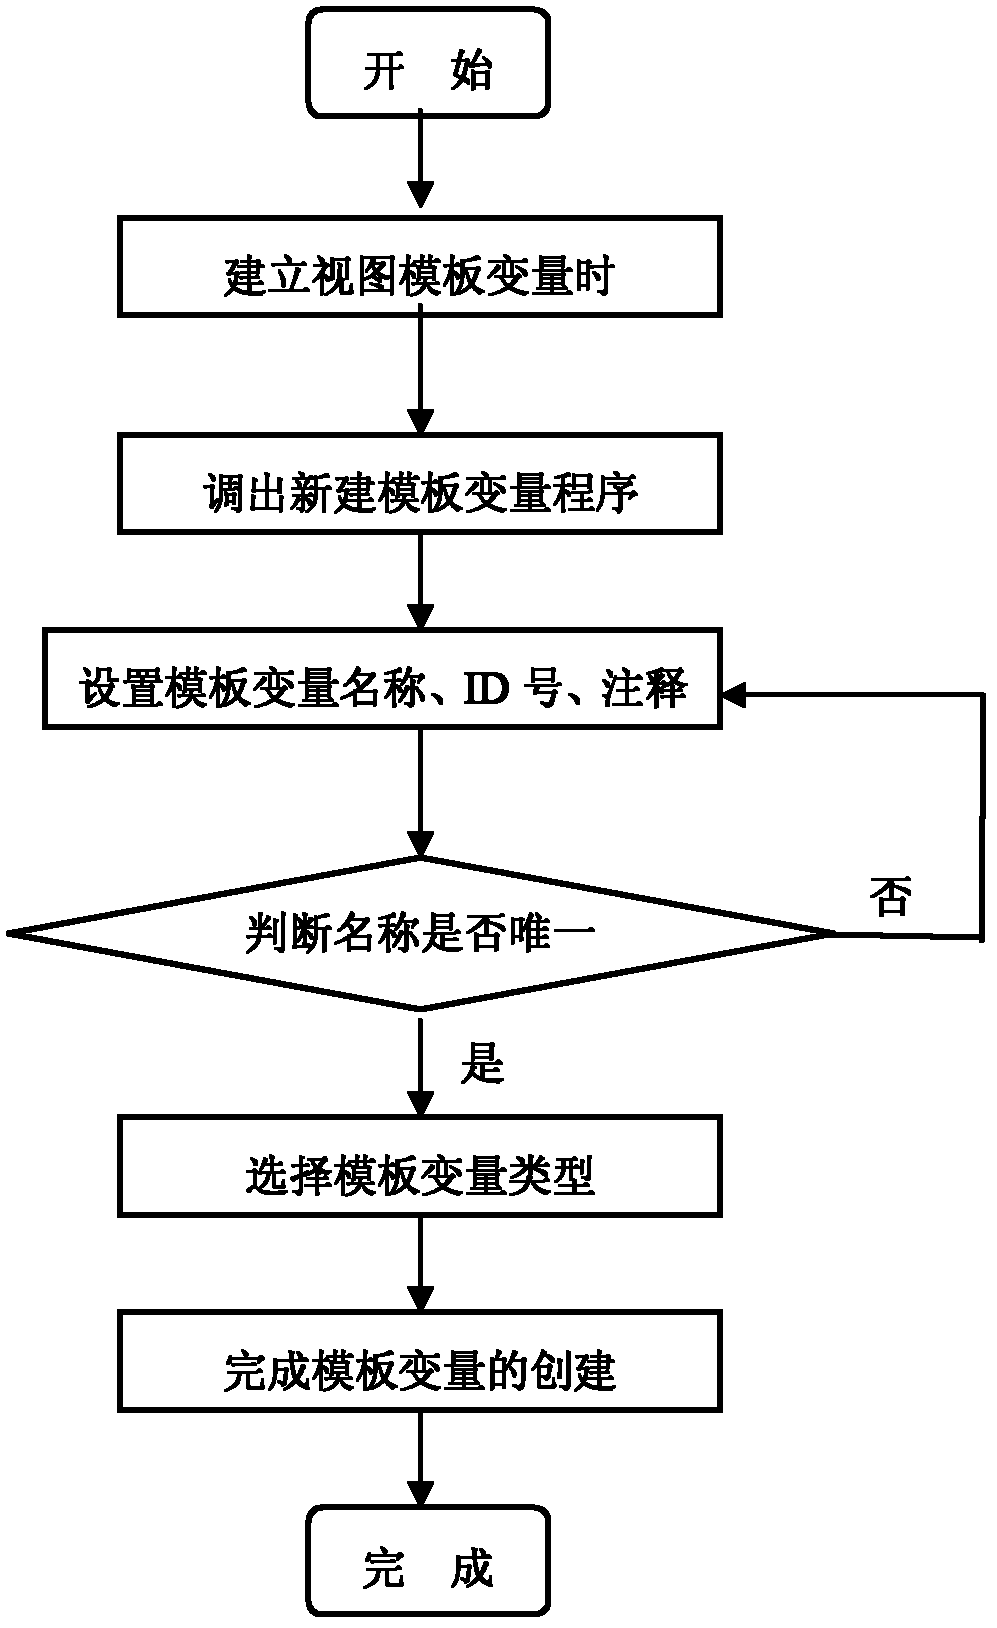 Realization method for dynamic template of support script in monitoring system